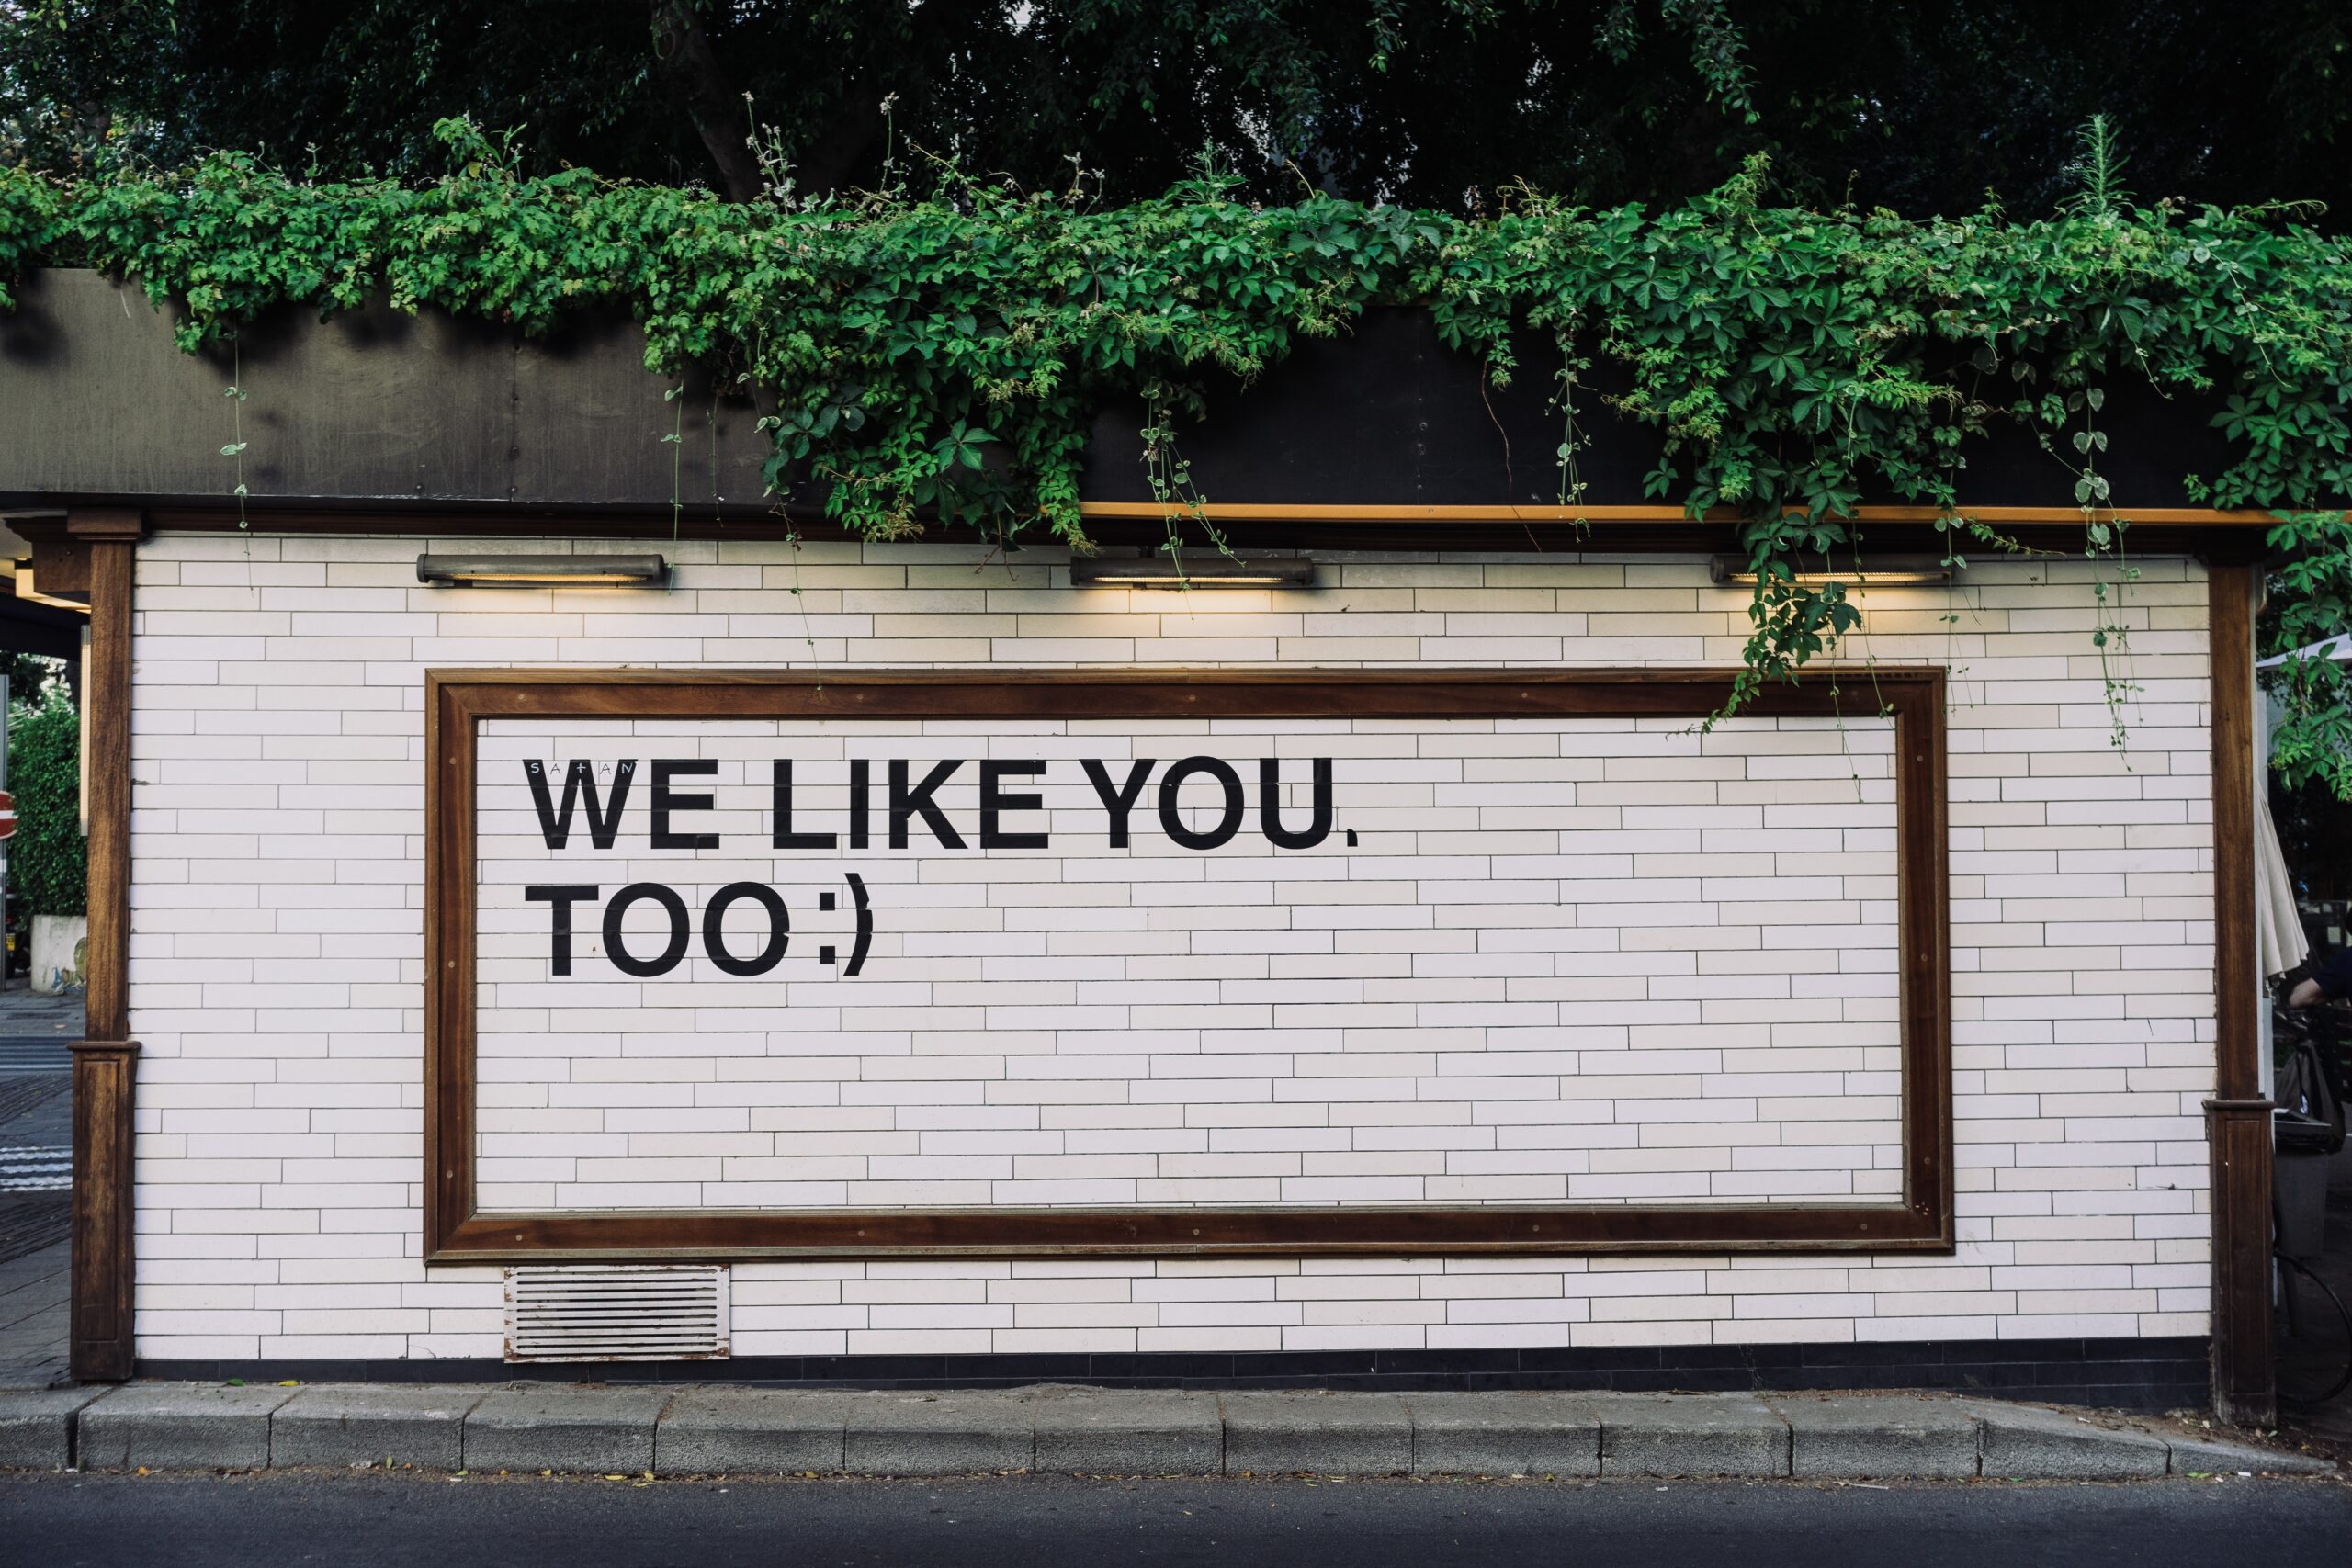 Wall with "We like you too :)" written on it